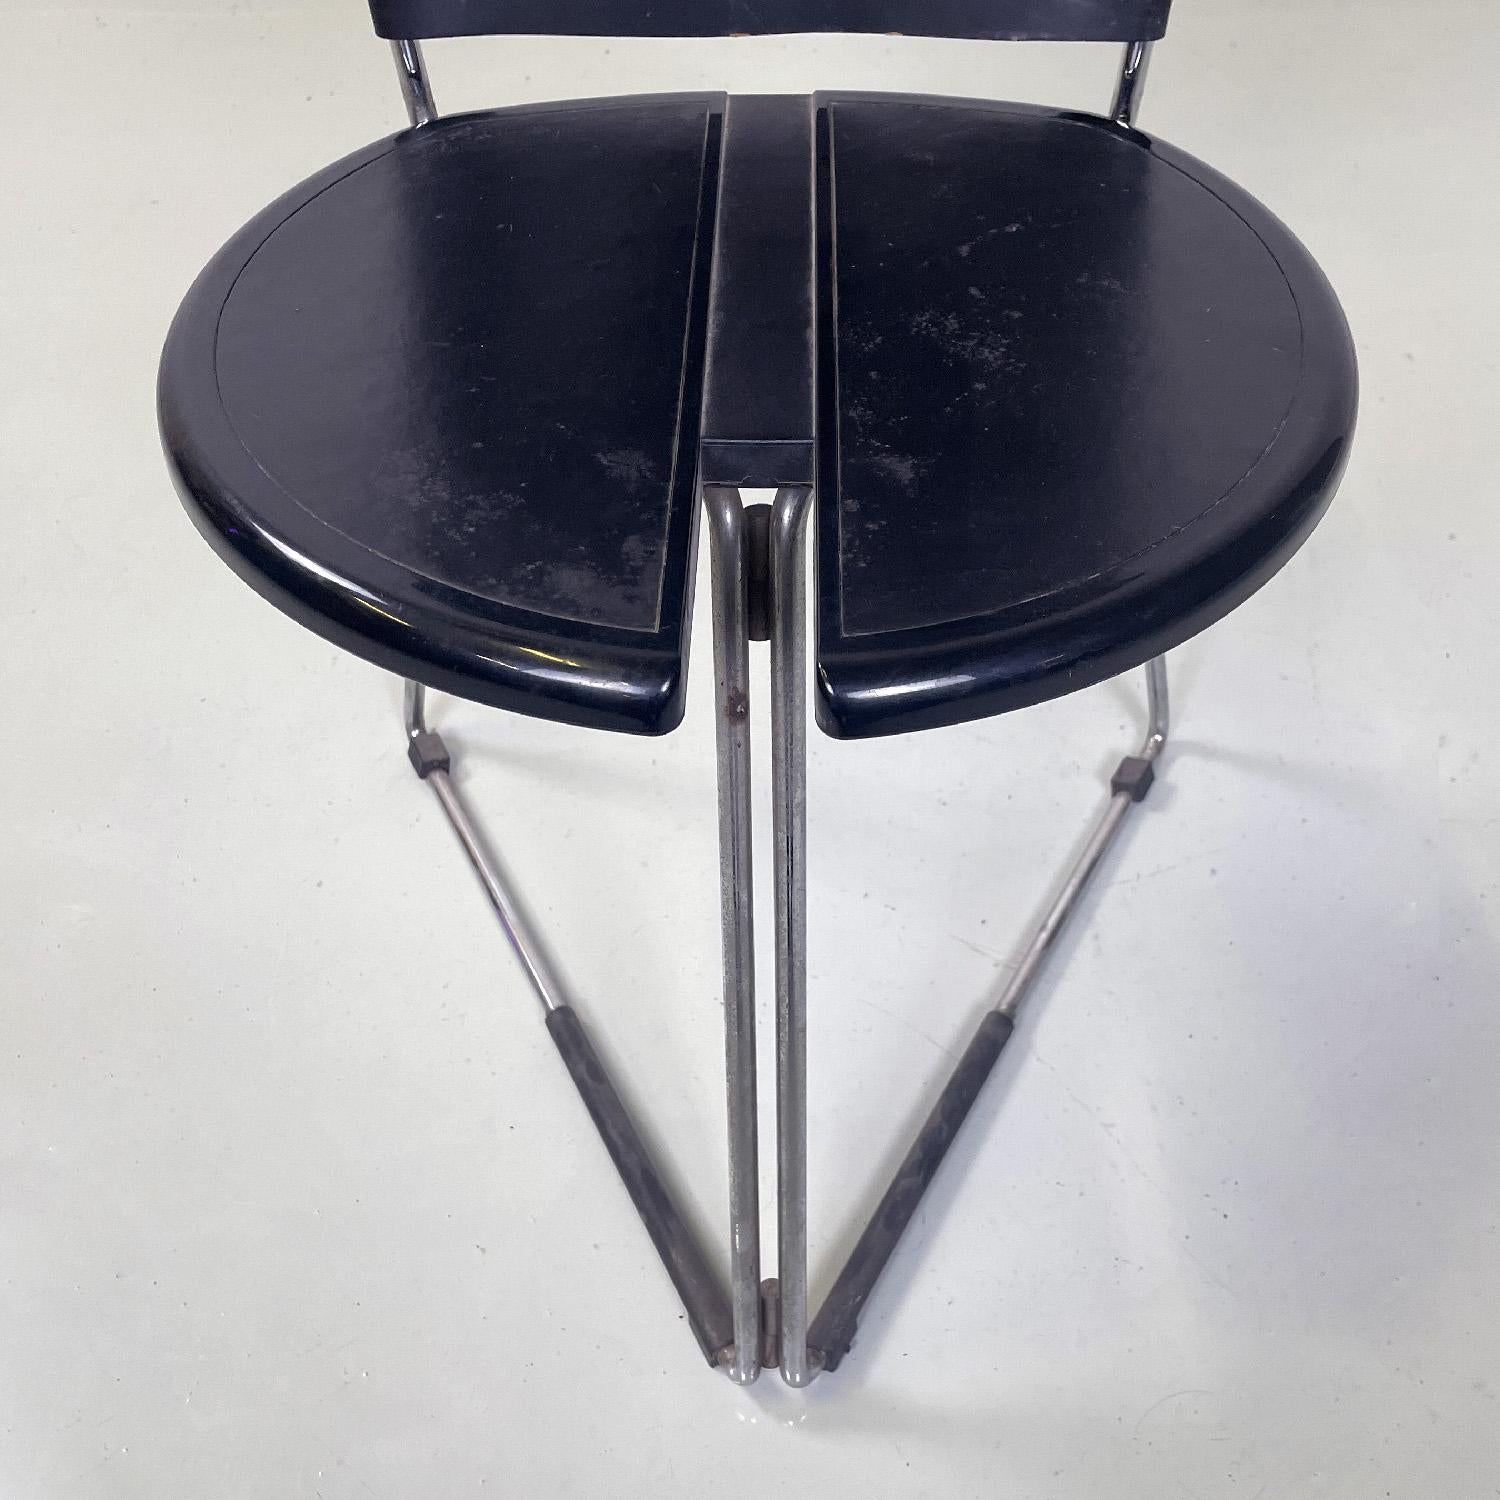 Italian modern black chair Terna by Gaspare Cairoli for Seccose, 1980s For Sale 1